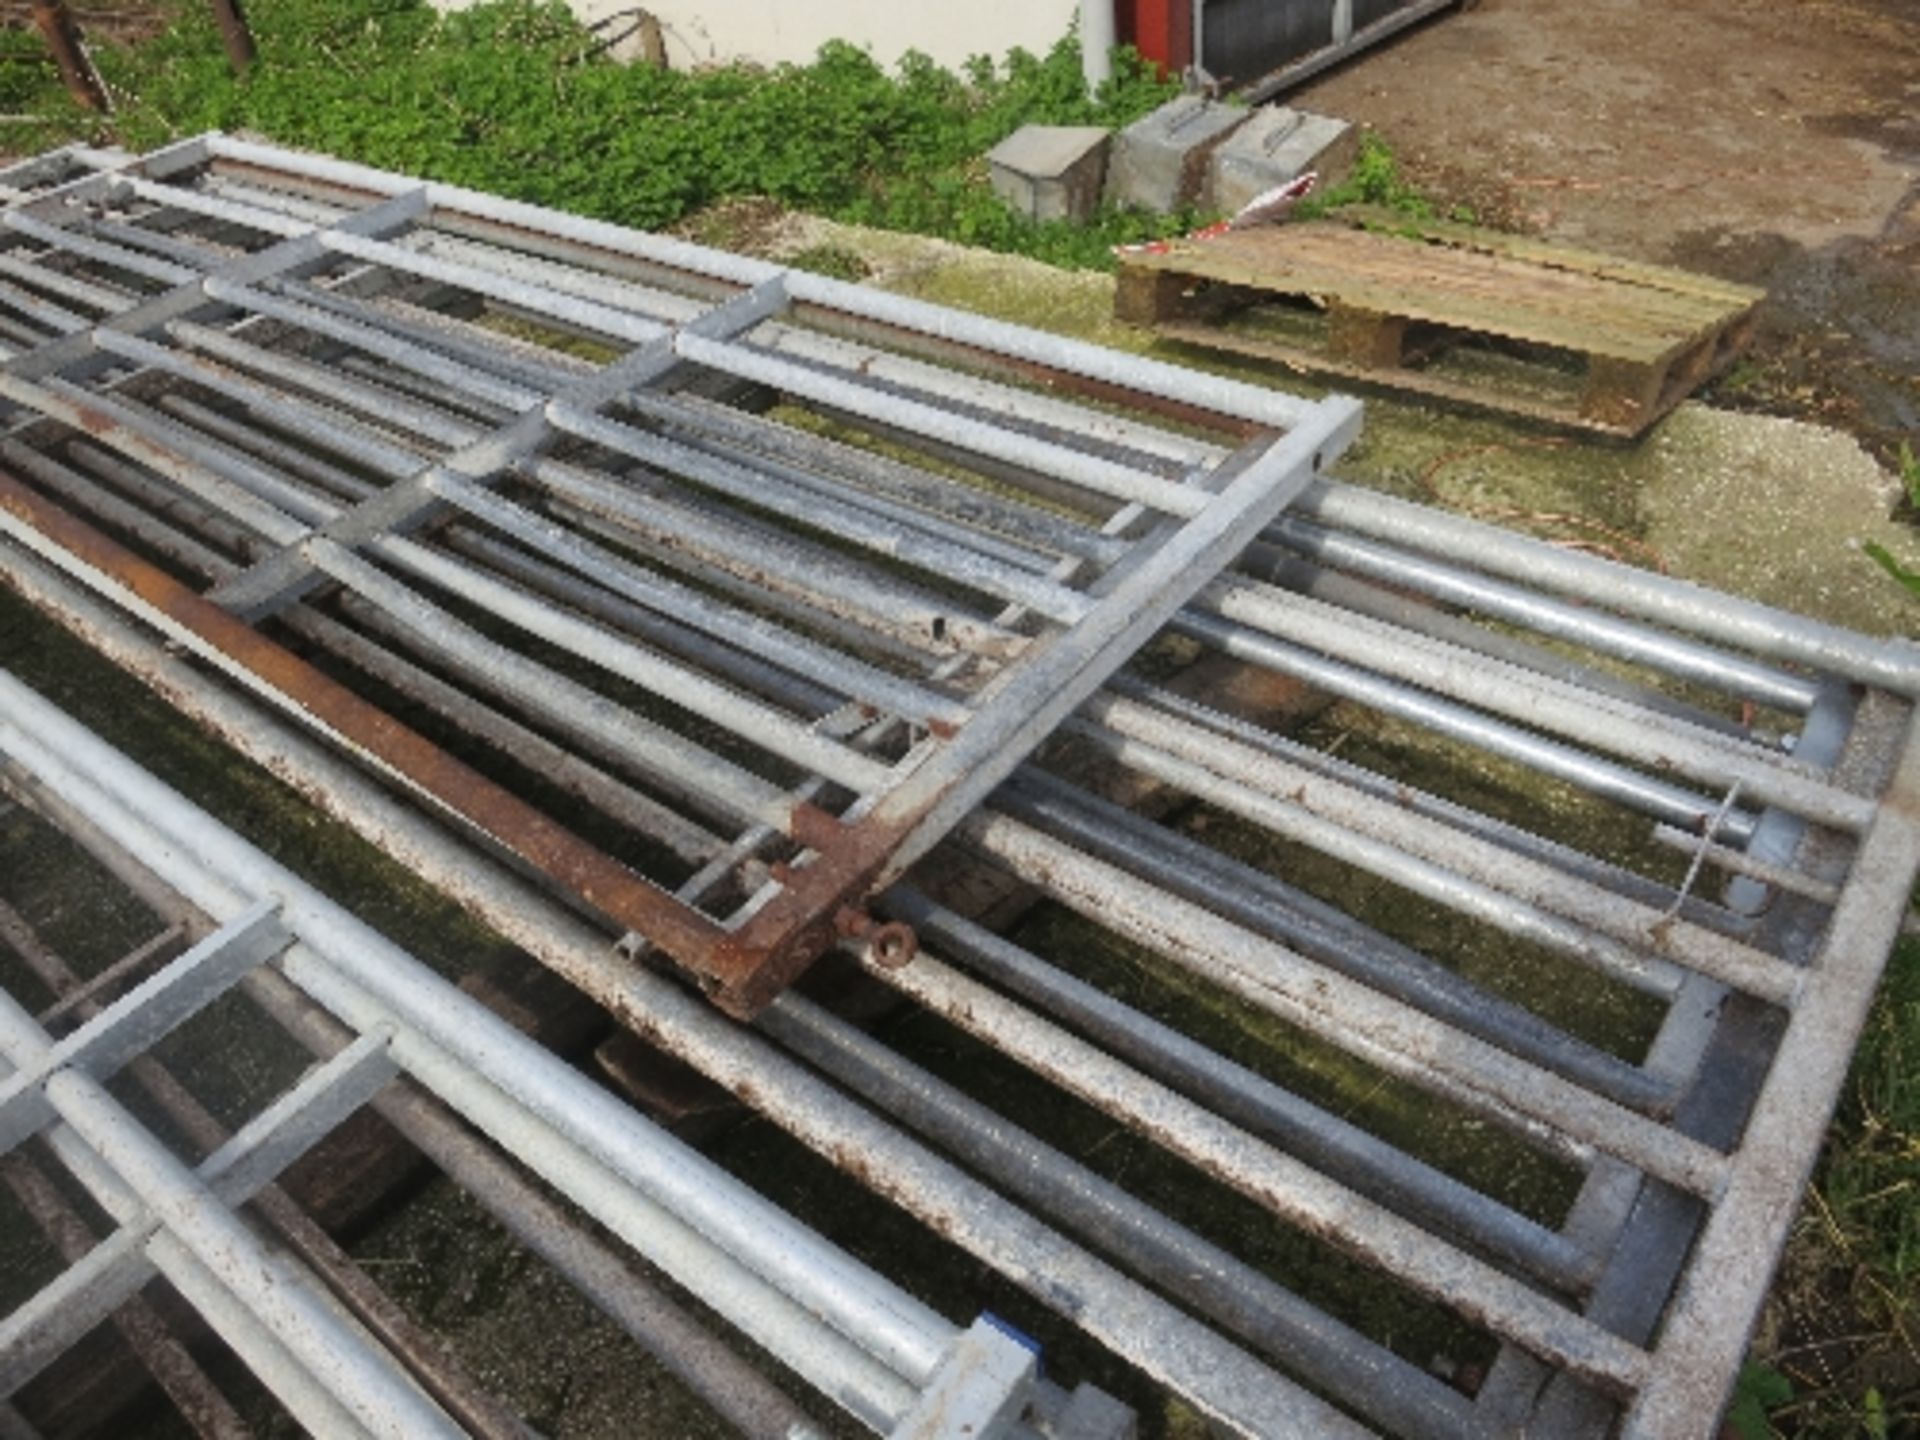 6 galvanised gates 4 x 4600 (15ft) and 2 no 3050 (10ft)